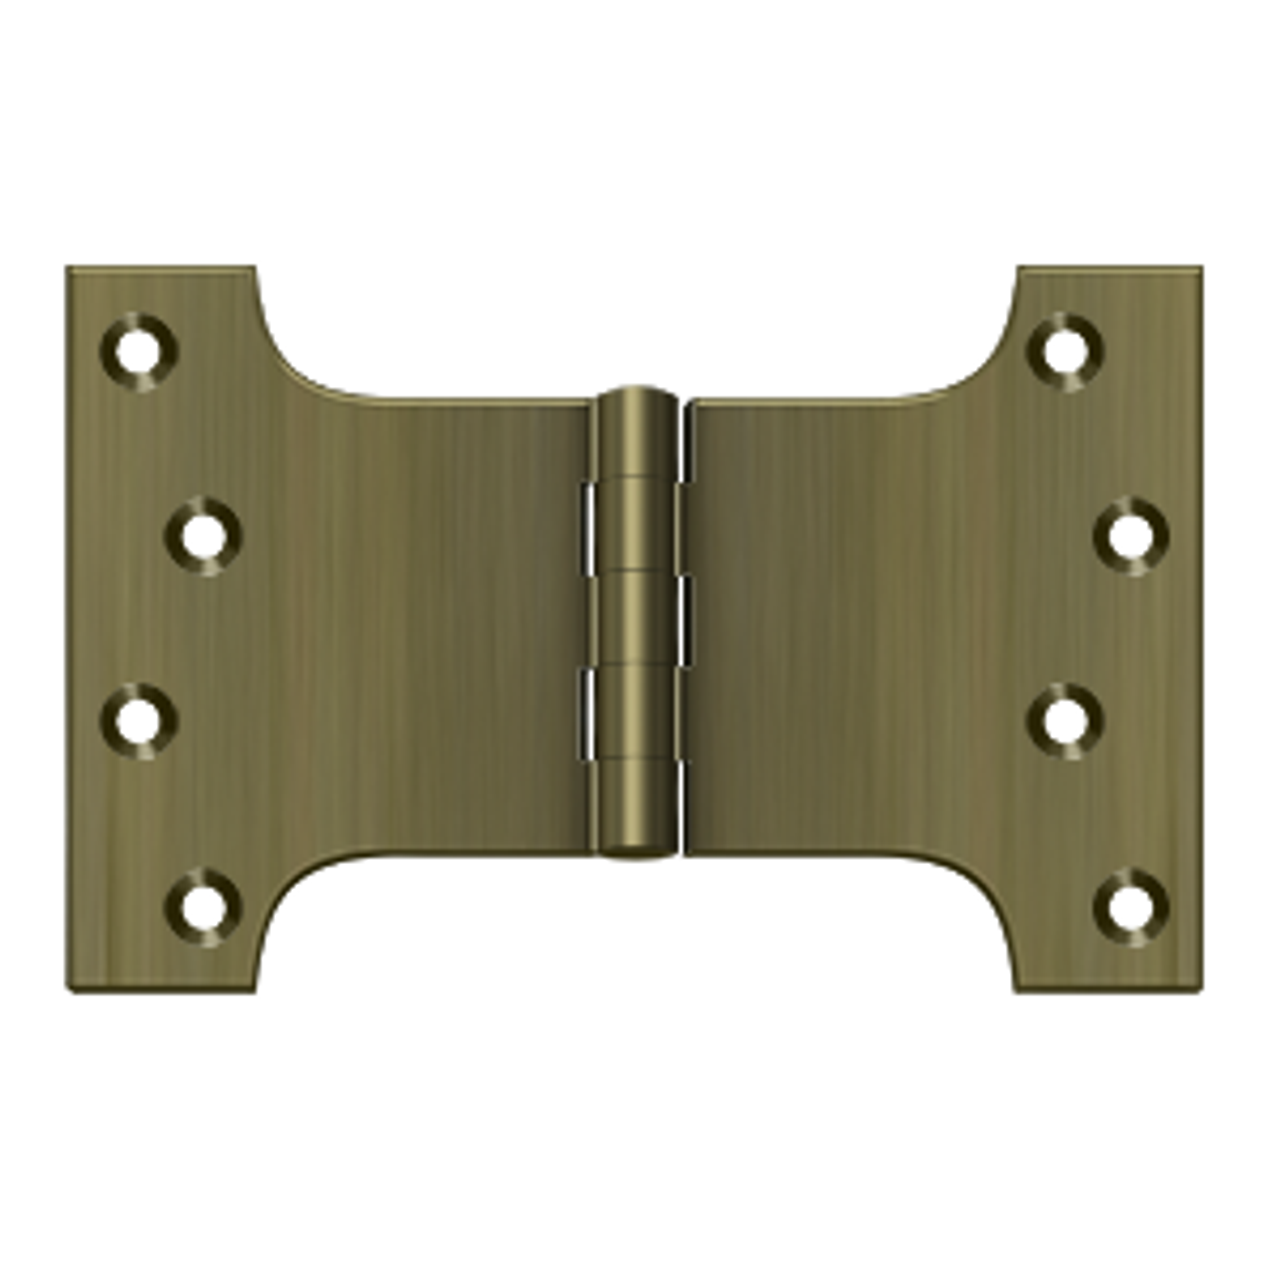 Deltana DSPA4060 4" X 6" PARLIAMENT HINGE SOLID BRASS